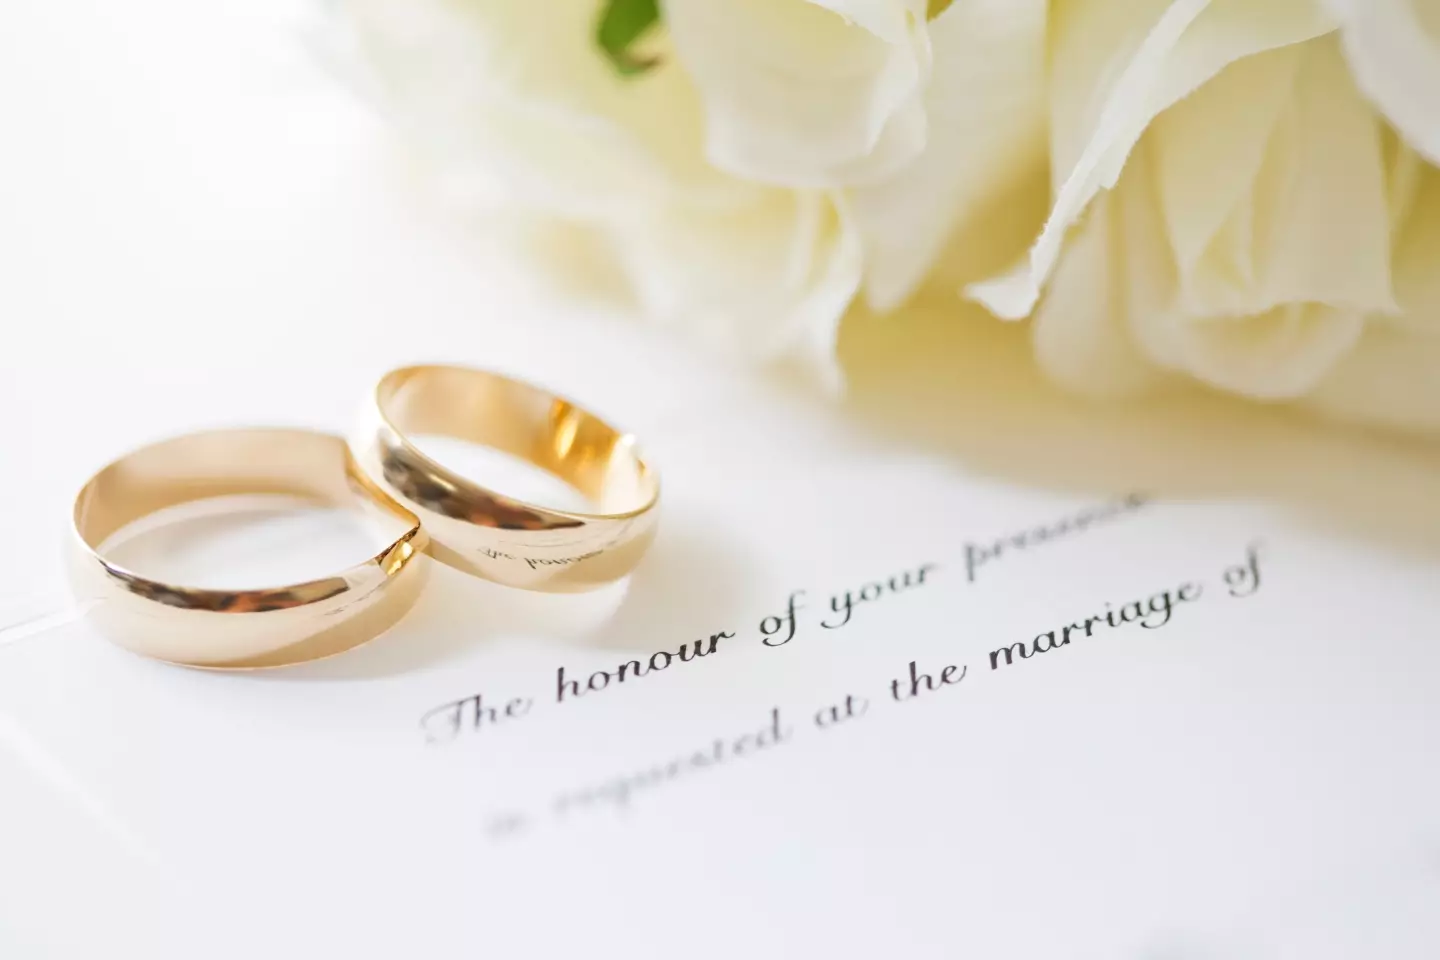 A wedding invitation! But how important are you really to the bride and groom?